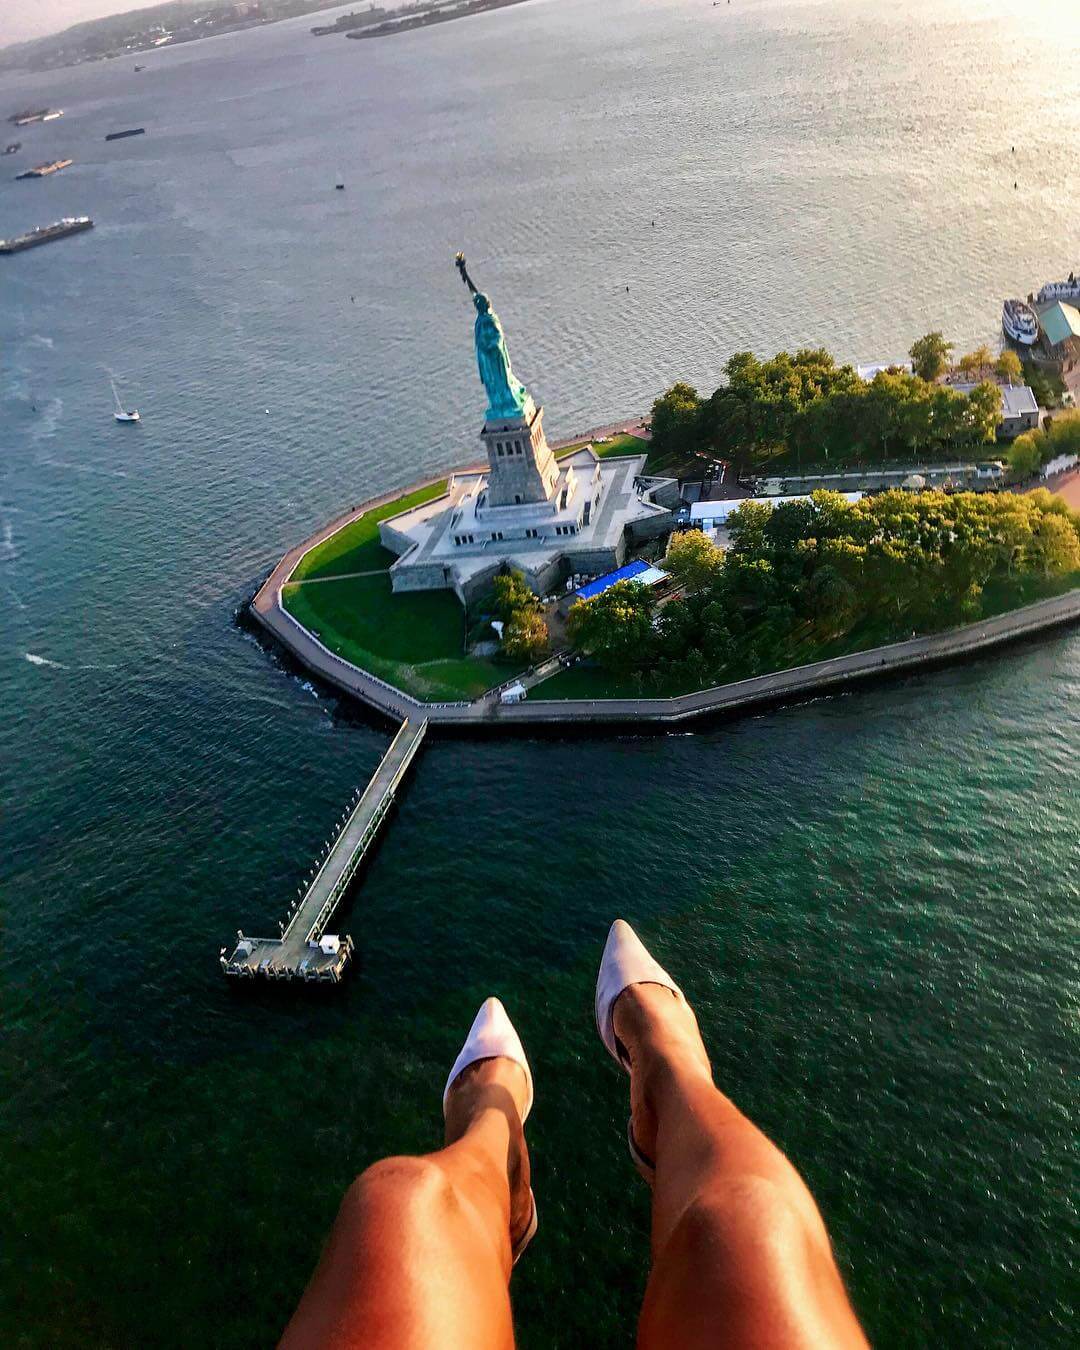 Despite Patrick Day's assurances that no FlyNYON pilot in New York would allow passengers to go up with very loose-fitting shoes, someone allowed these heels on a flight on Sept. 2. 